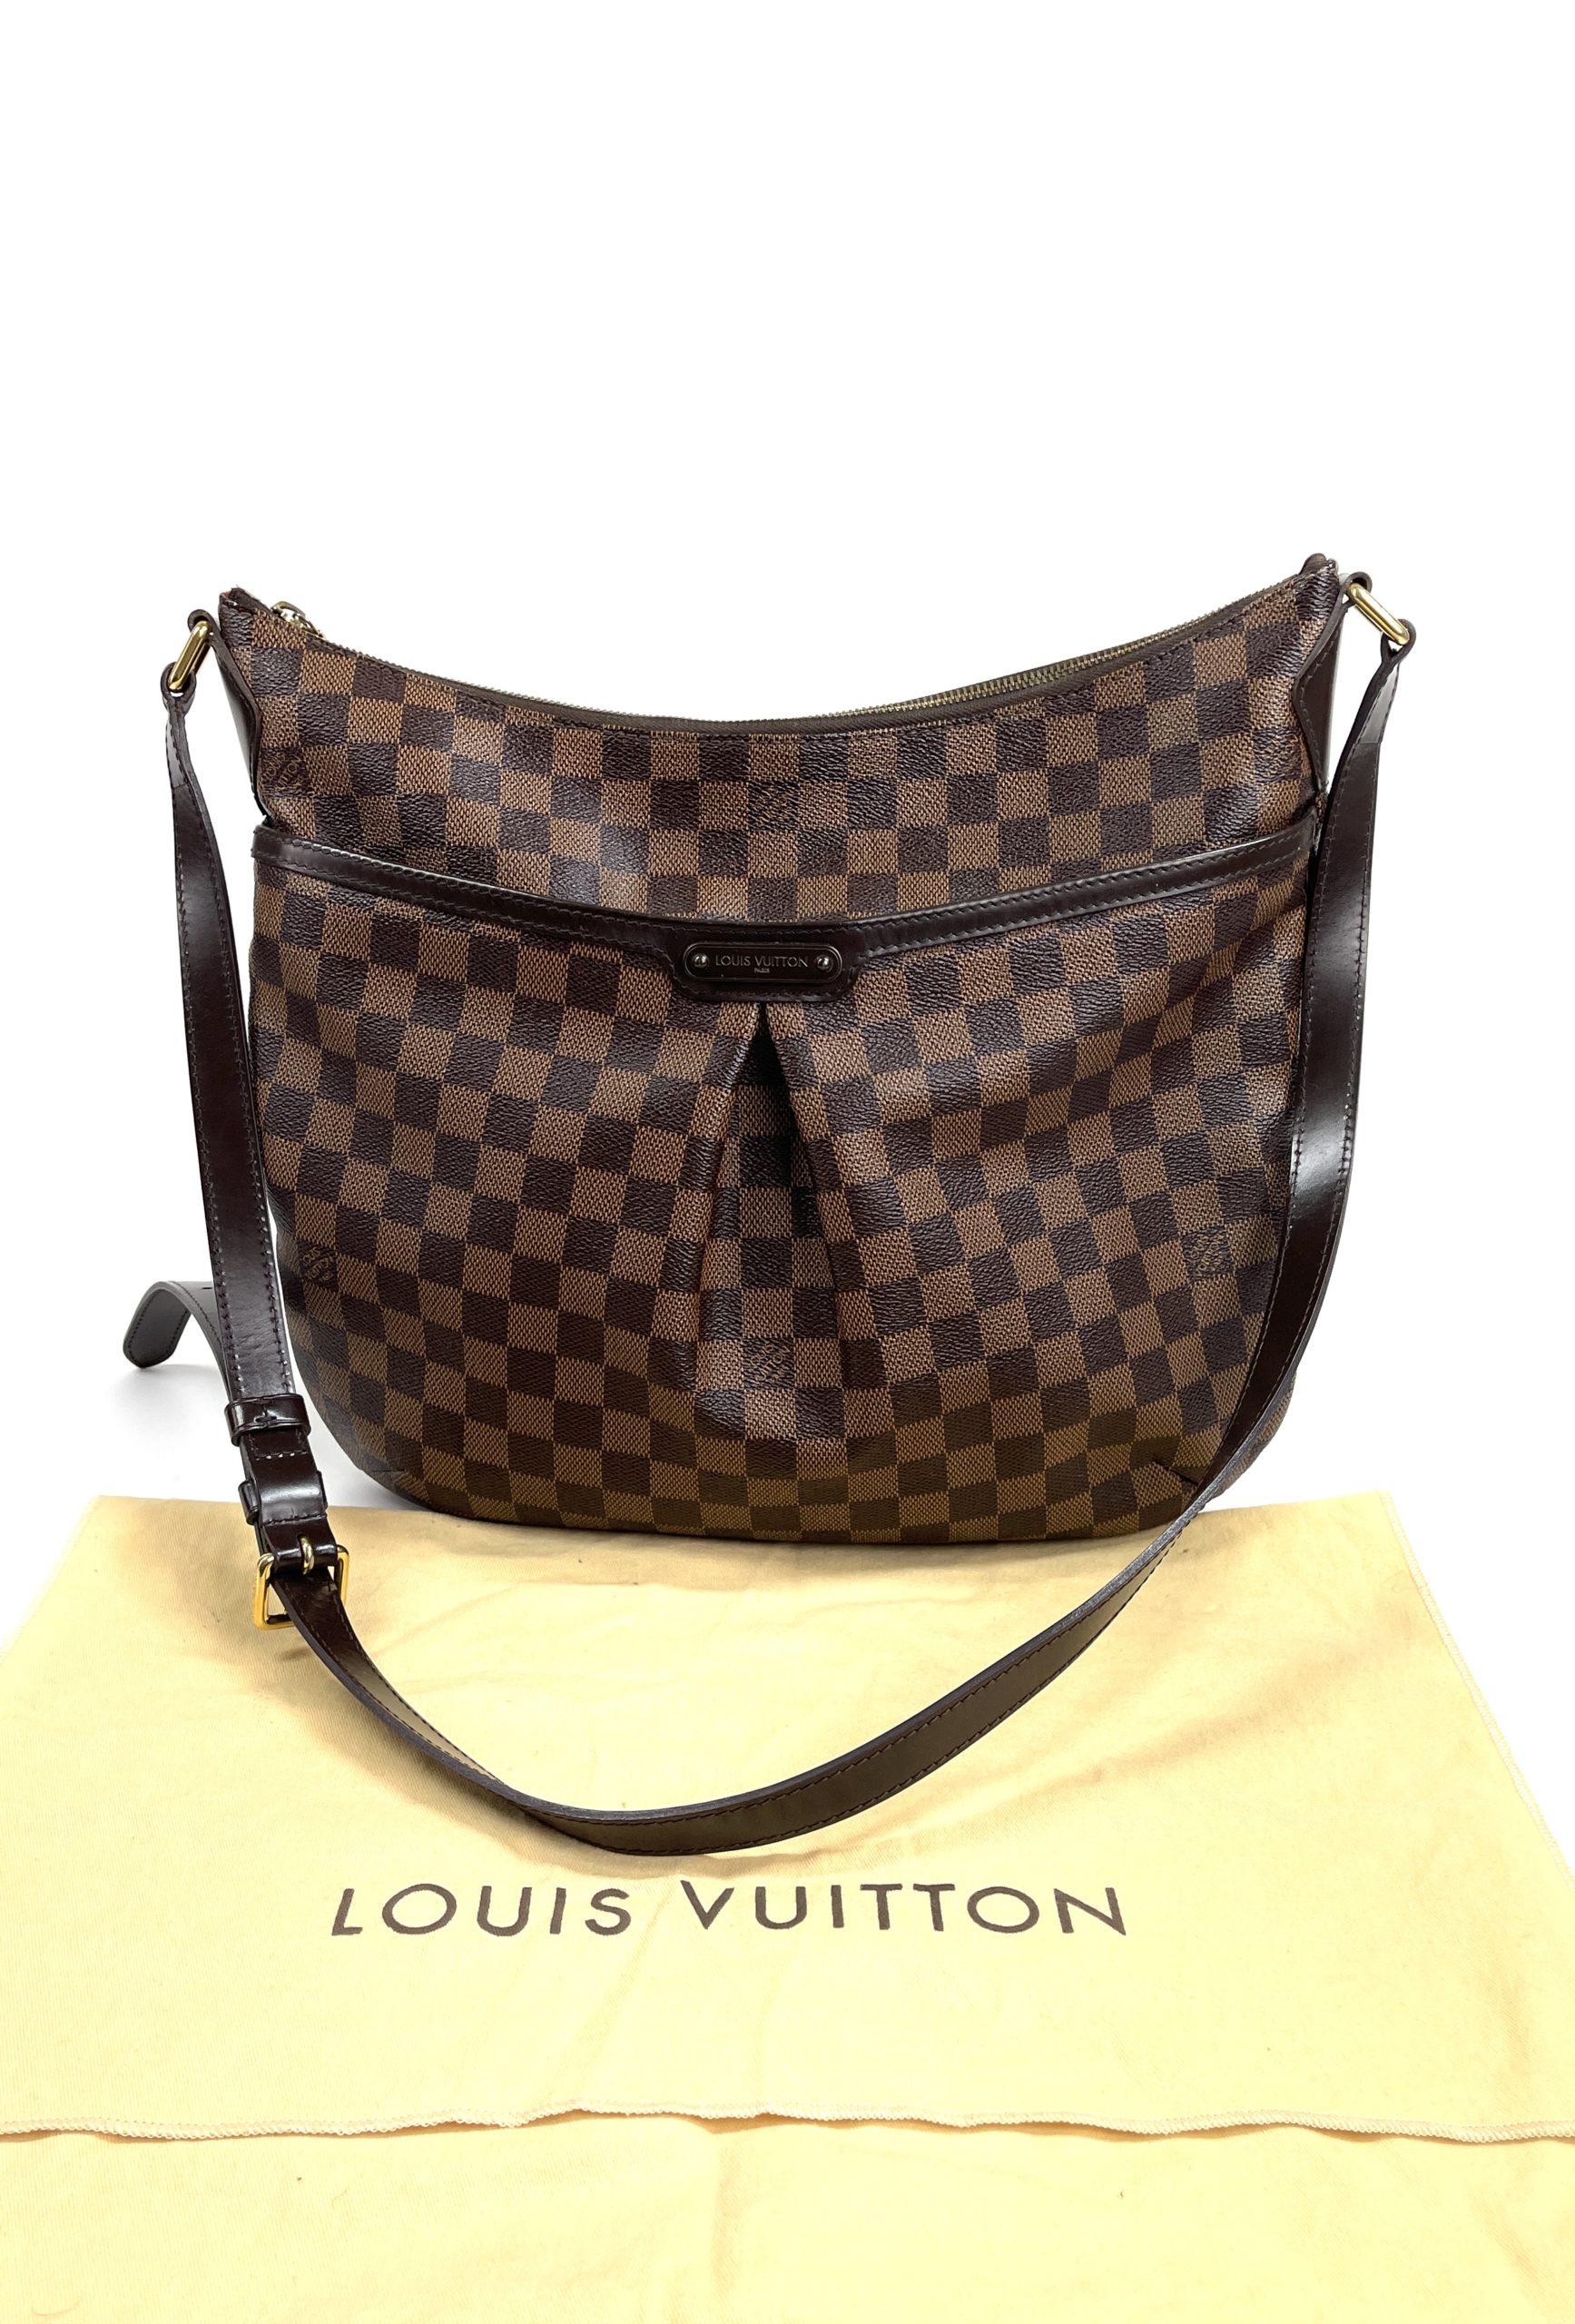 Luxury Reborn Bags - 𝓮𝓼𝓬𝓪𝓹𝓮 the ᴏʀᴅɪɴᴀʀʏ ✨ feat: ready to purchase, LV  Neverfull MM in brown monogram canvas with LRB embellishments that inclu